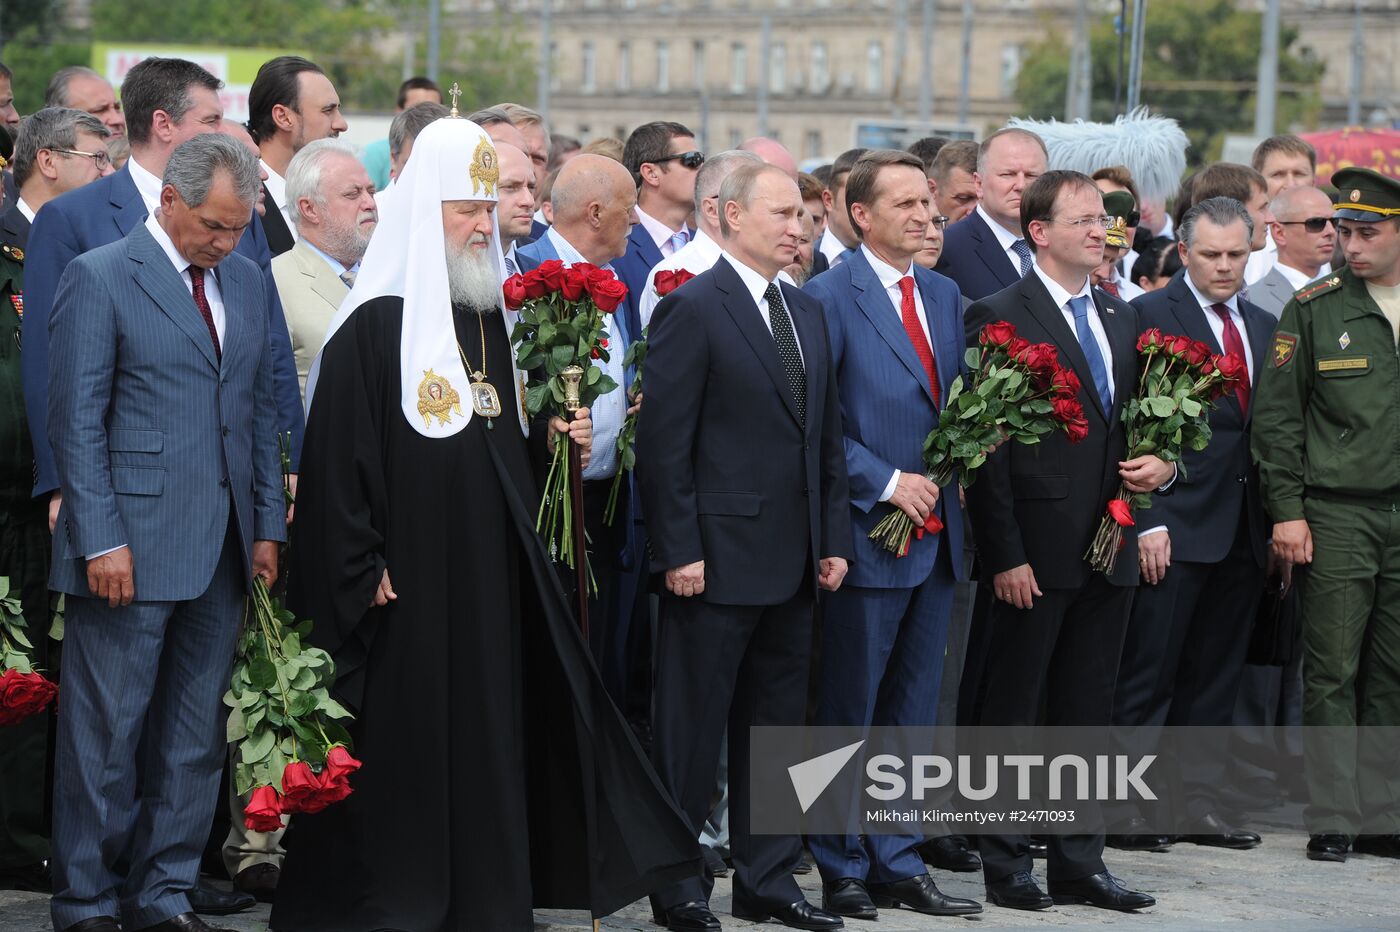 Vladimir Putin attends unveiling of monument to WWI heroes